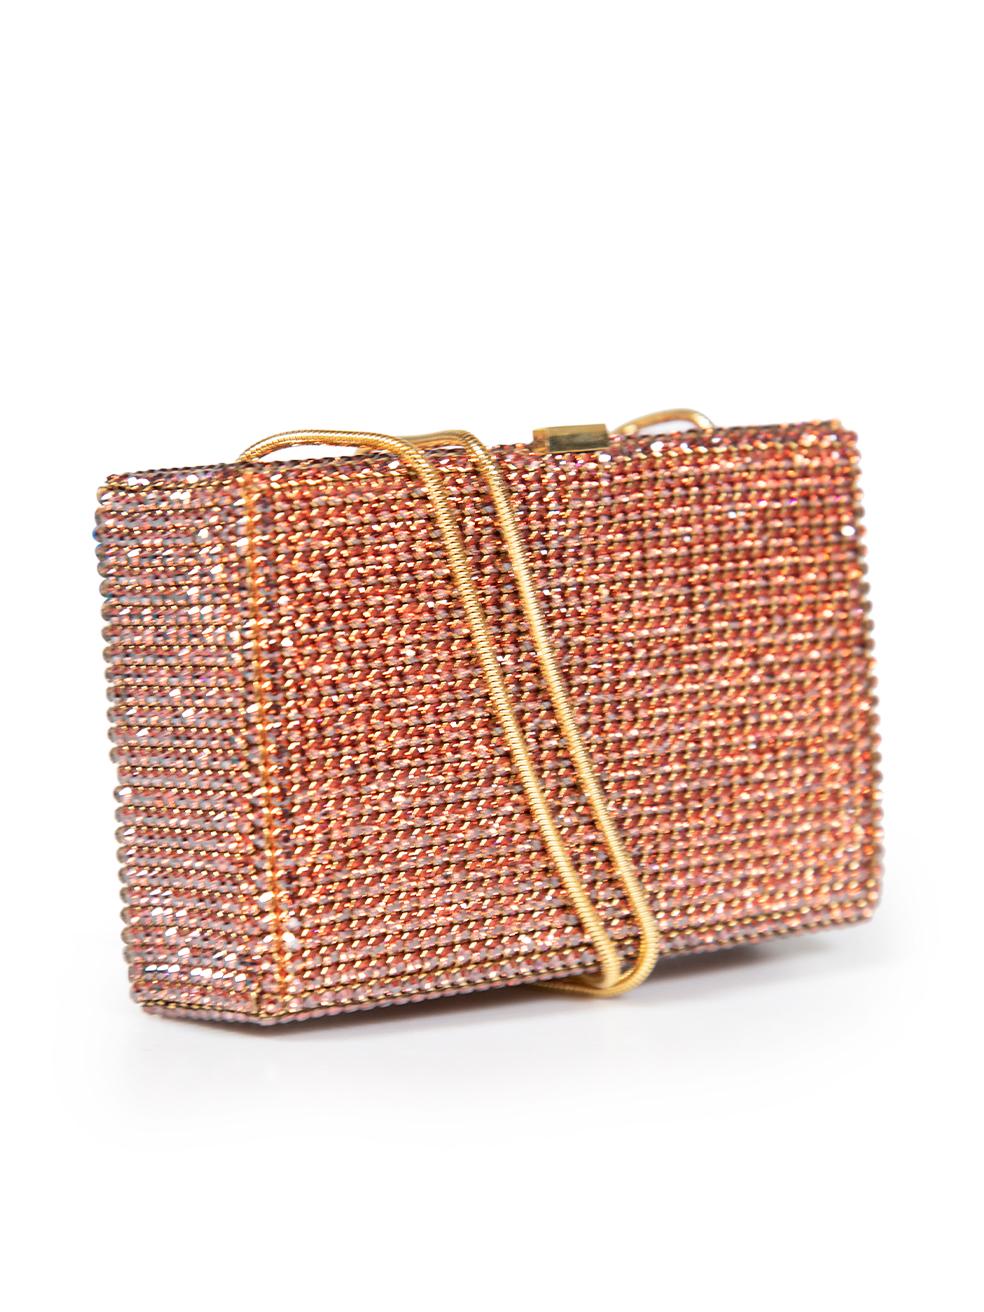 CONDITION is Very good. Minimal wear to bag is evident. There are some scratches and abrasions to the leather lining, and one crystal missing from the edge of the bag on this used Swarovski designer resale item.
 
 Details
 Metallic orange
 Crystal
